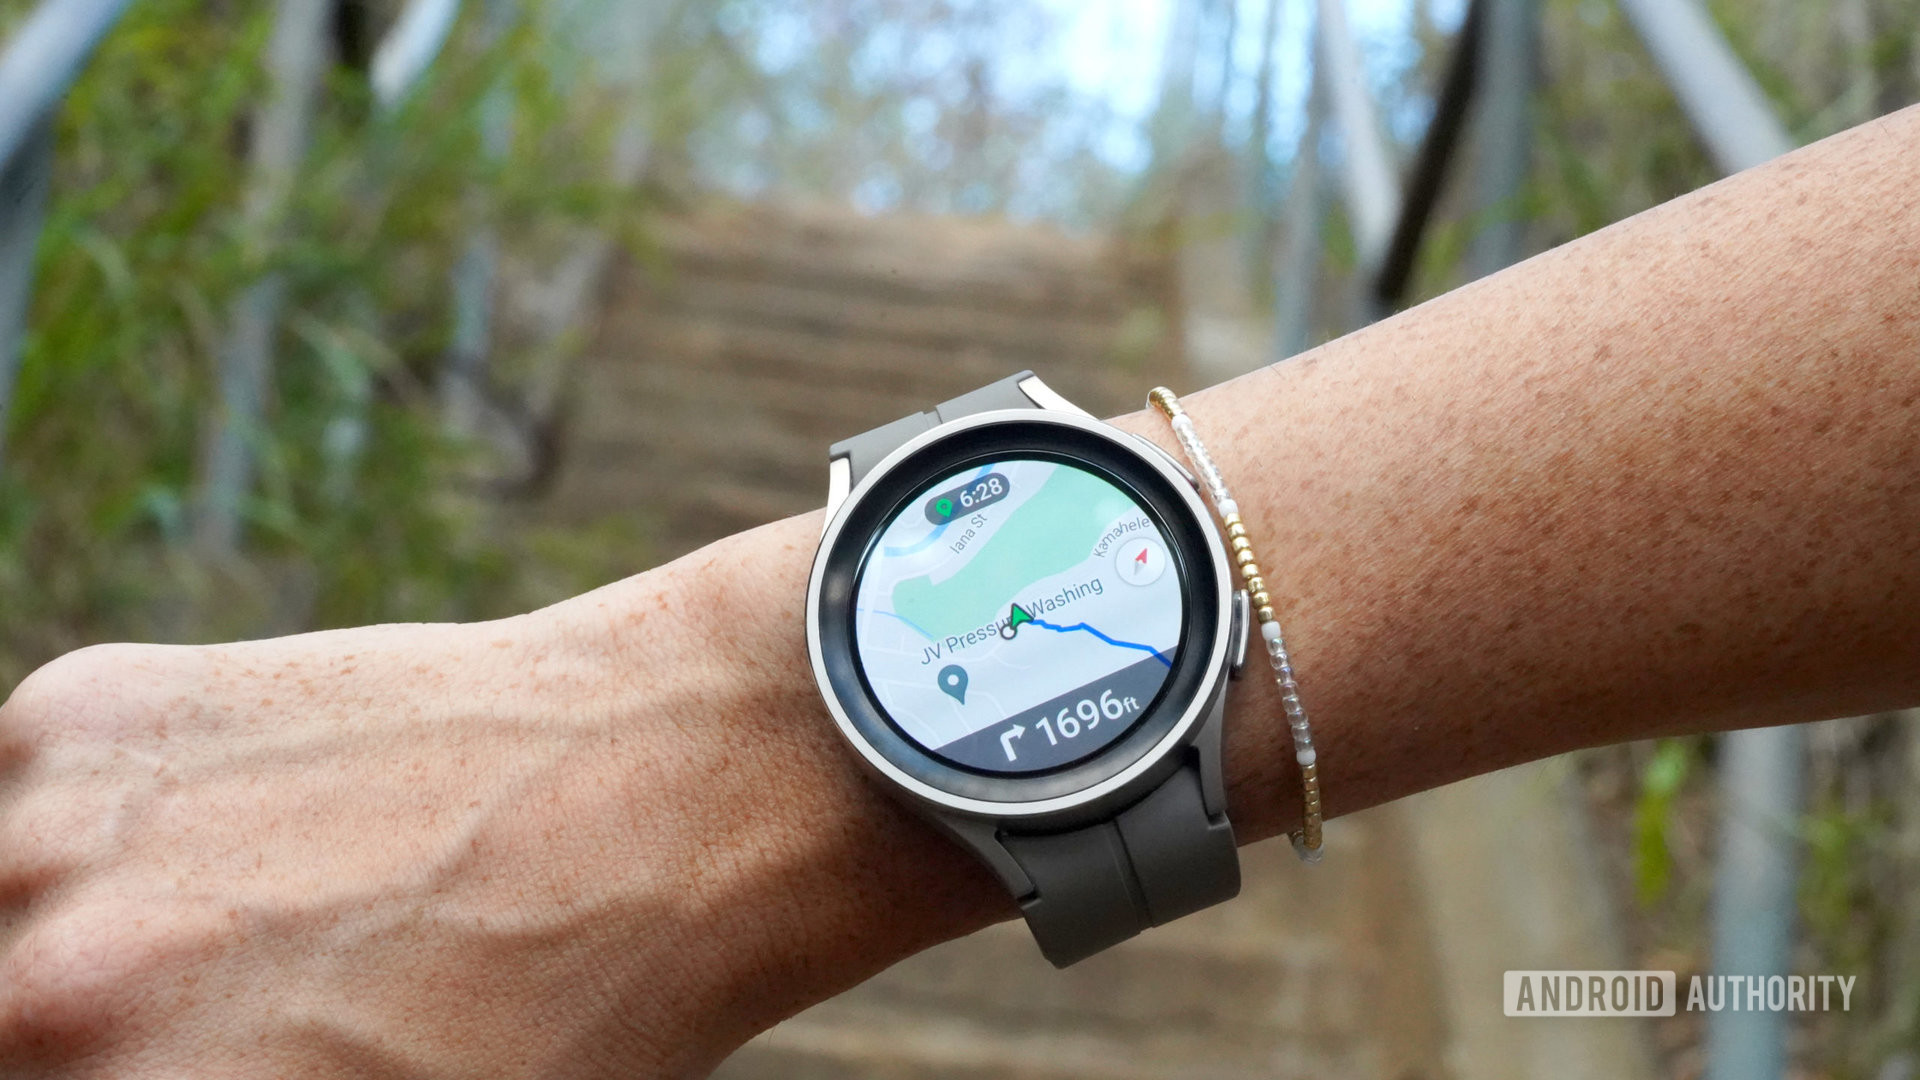 Carriers should stop charging extra for using smartwatch data